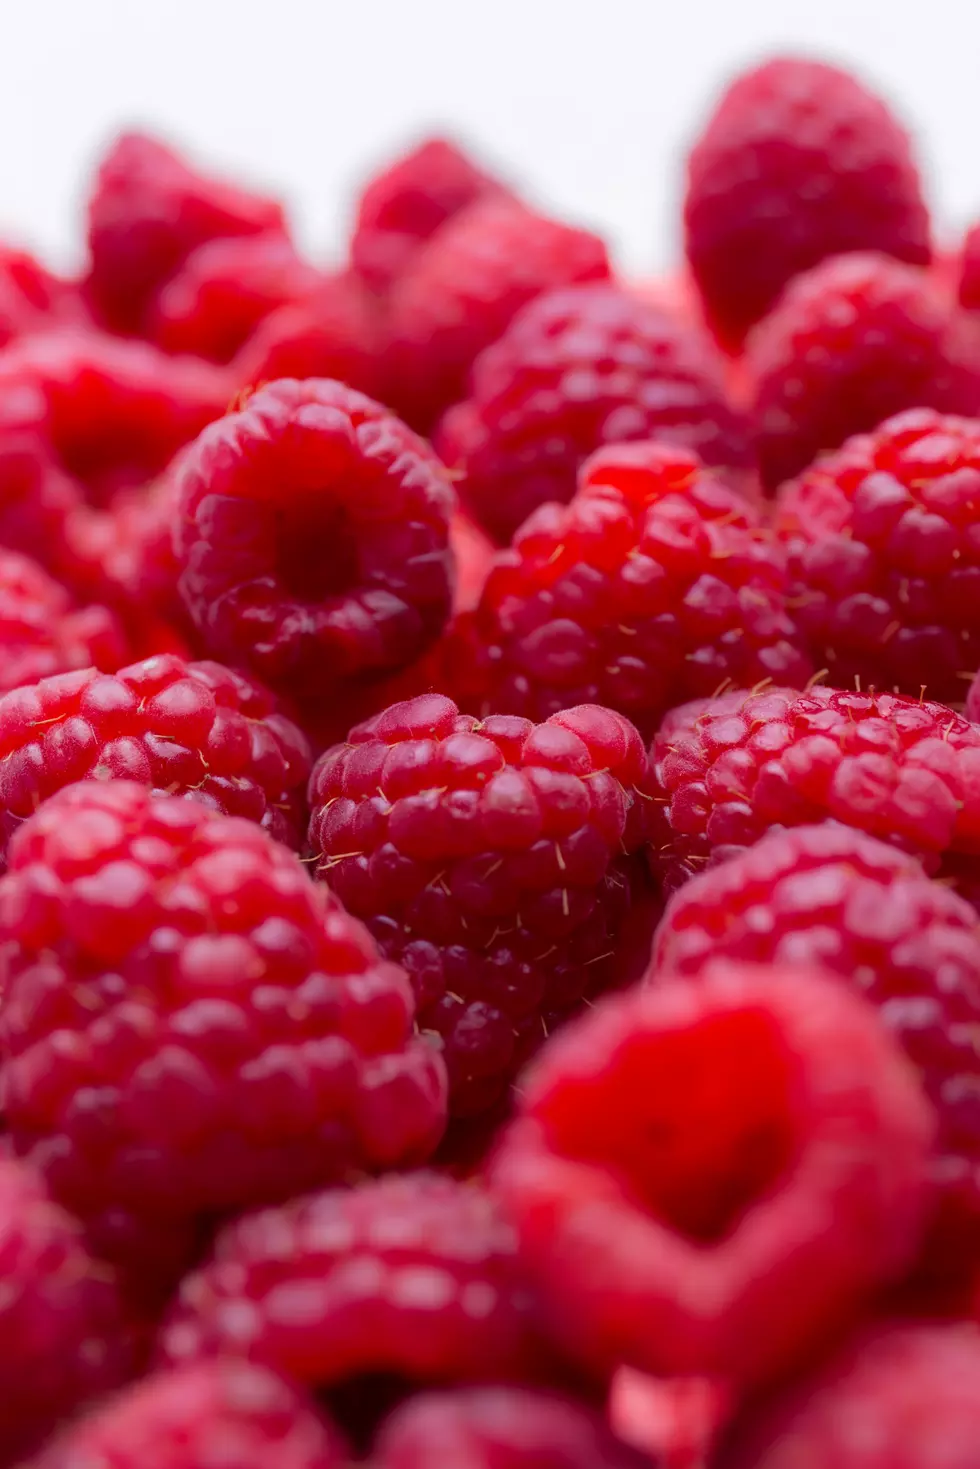 Almost Opening Day! Pick Your Own Raspberries At Happy Day Farm In Manalapan, New Jersey